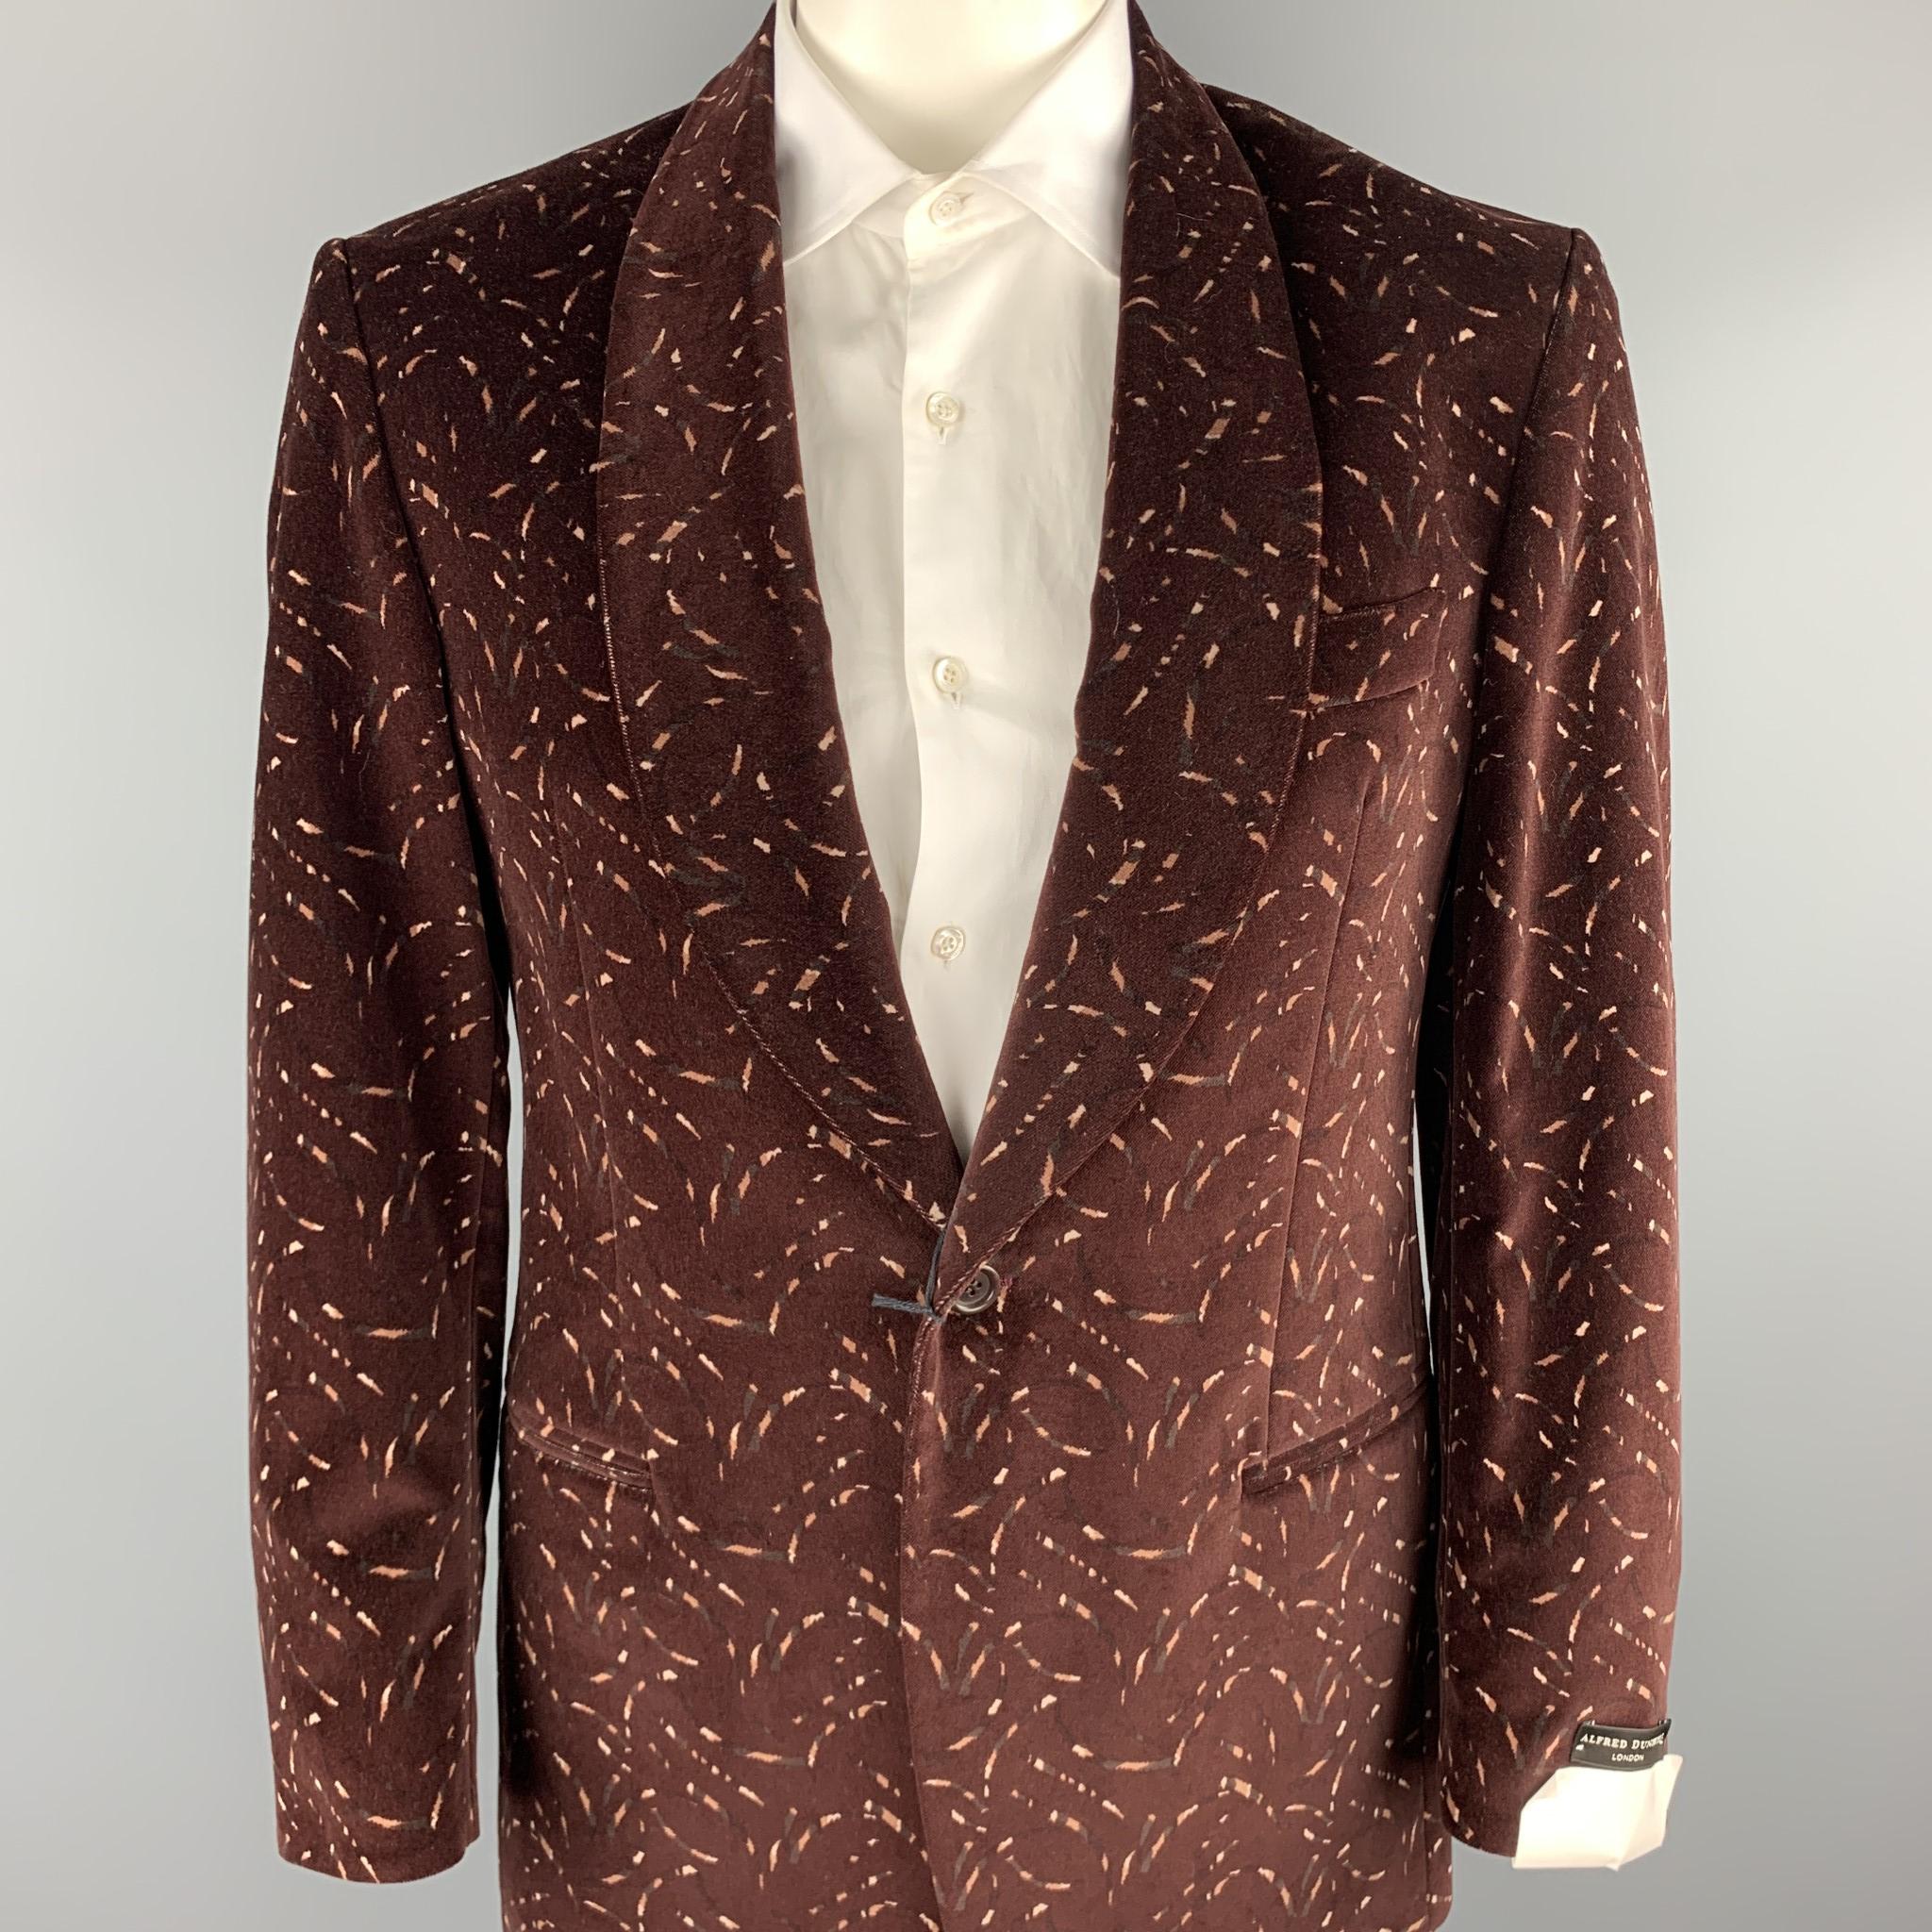 ALFRED DUNHILL sport coat comes in a burgundy print cotton velvet  featuring a shawl collar, slit pockets, and a single button closure. Made in Italy.

New With Tags. 
Marked: IT 50 R 

Measurements:

Shoulder: 18.5 in. 
Chest: 40 in. 
Sleeve: 25.5